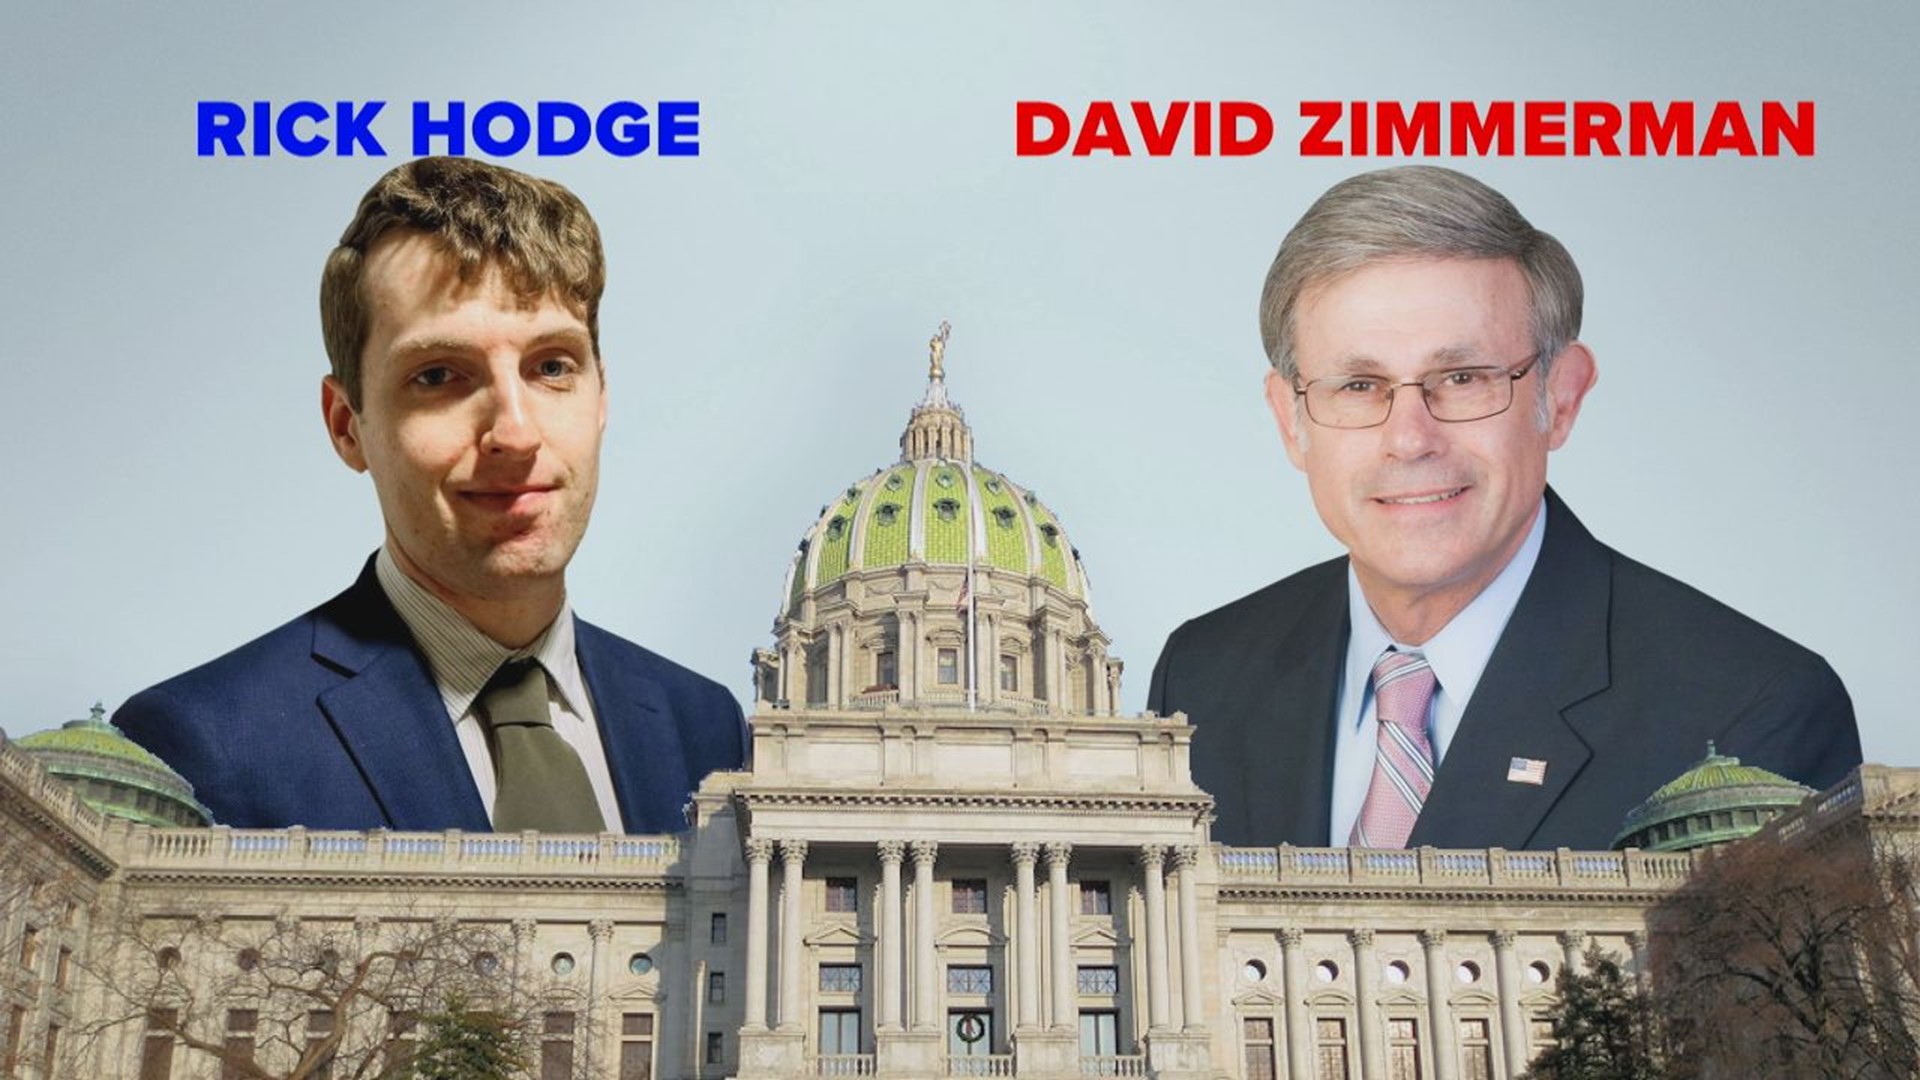 Zimmerman is running for a fourth term in the eastern Lancaster County district against Hodge, a self-described progressive candidate.